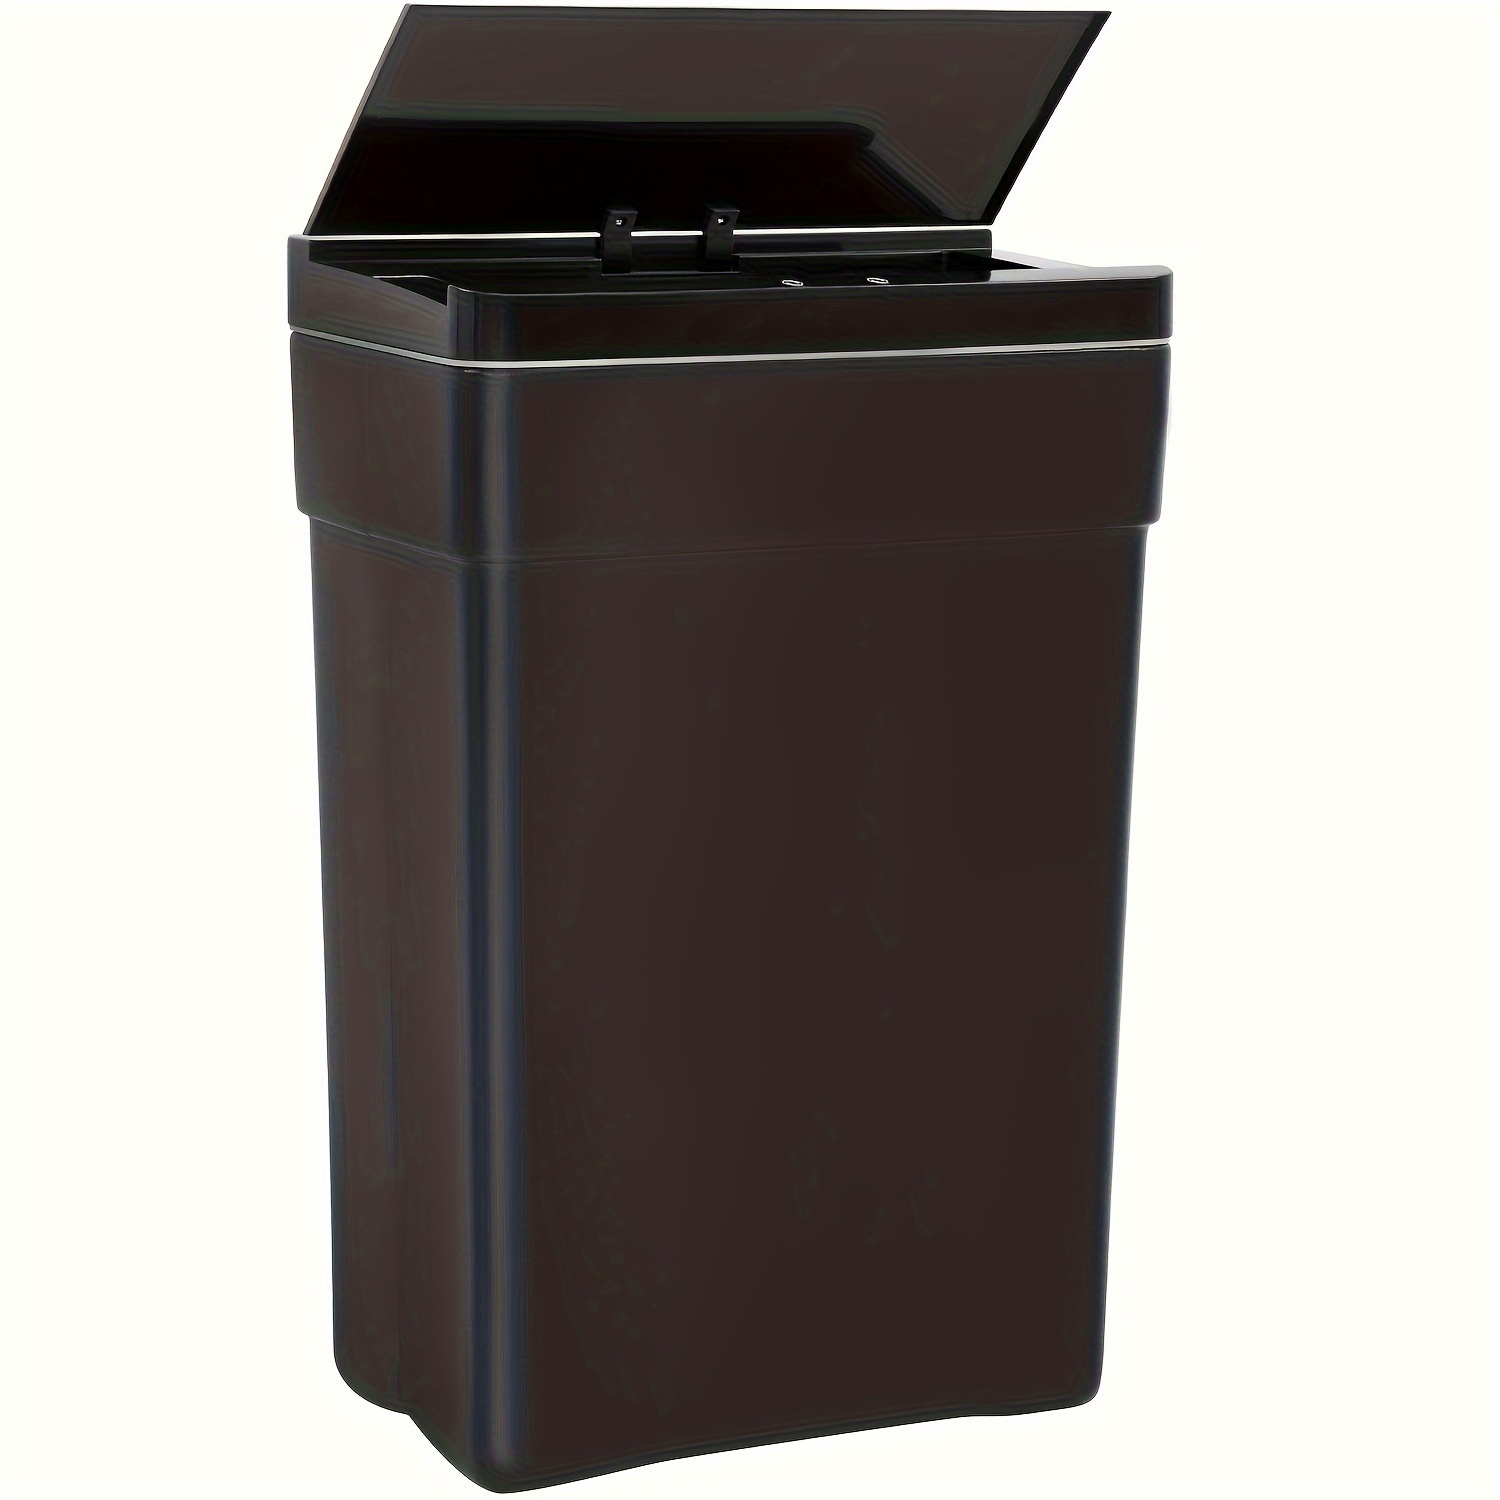 

13 Gallon Trash Can Automatic Kitchen Trash Can High-capacity Garbage Can With Lid For Bedroom Bathroom Home Office 50 Liter